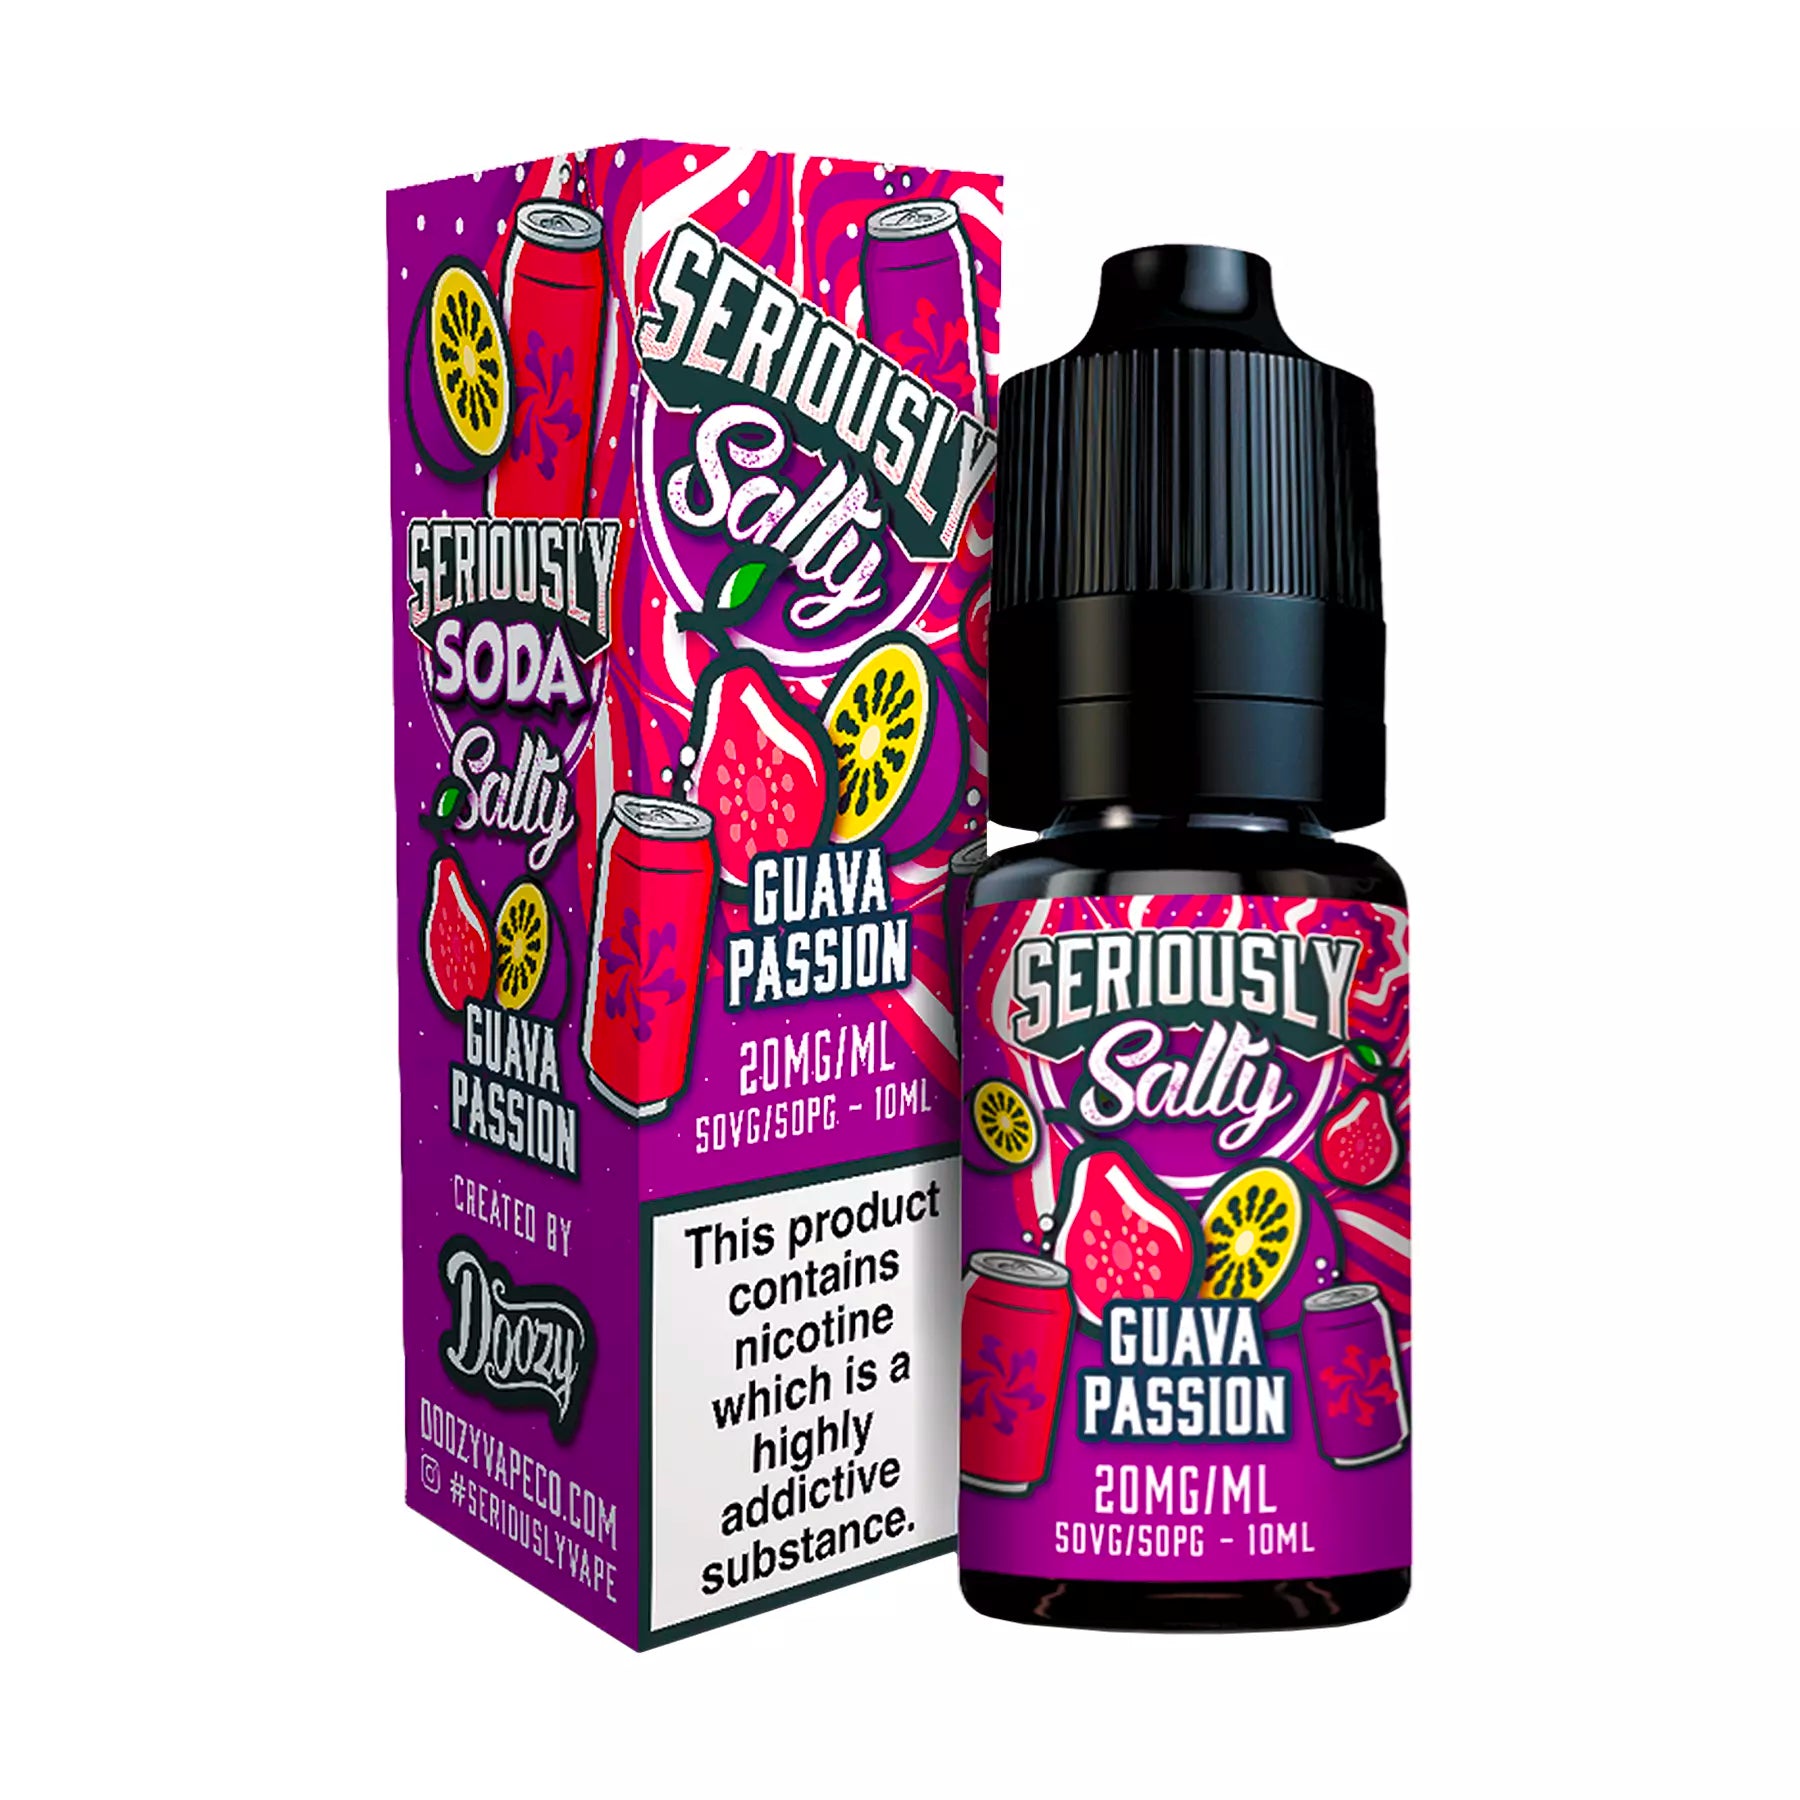 A Mouth Watering Combination of Crisp Juicy Guava complimented by the Exotic taste of Sweet Tangy Passionfruit. Based on the Infamous Soft Drink Flavour.